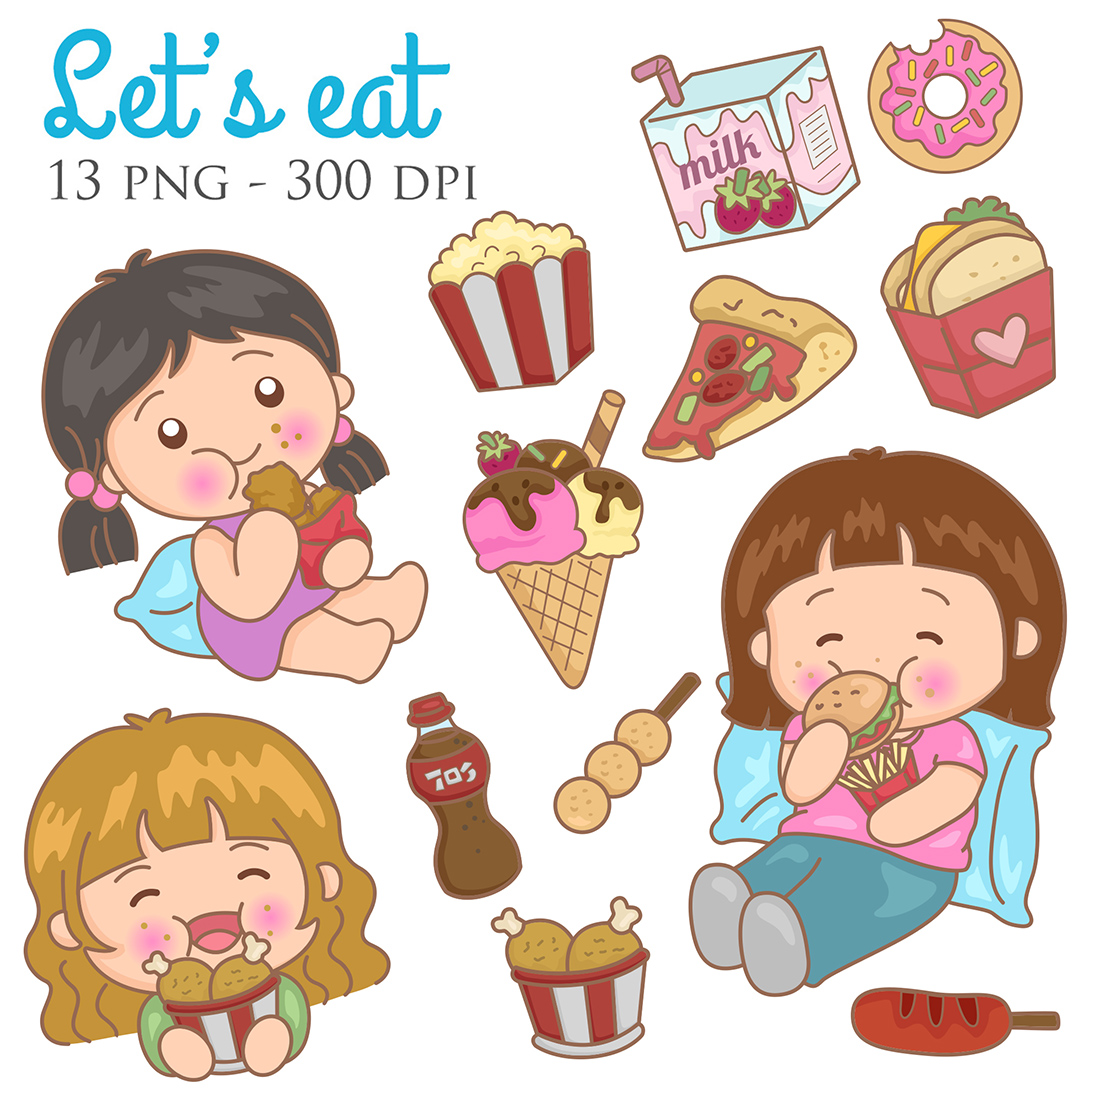 Cute and Funny Little Girl Kids Love and Like To Eat Food and Junk Food Drink Feel Happy Ice Cream Popcorn Pizza Sandwich Donut Milk Fried Chicken Cola Illustration Cartoon Clipart Vector cover image.